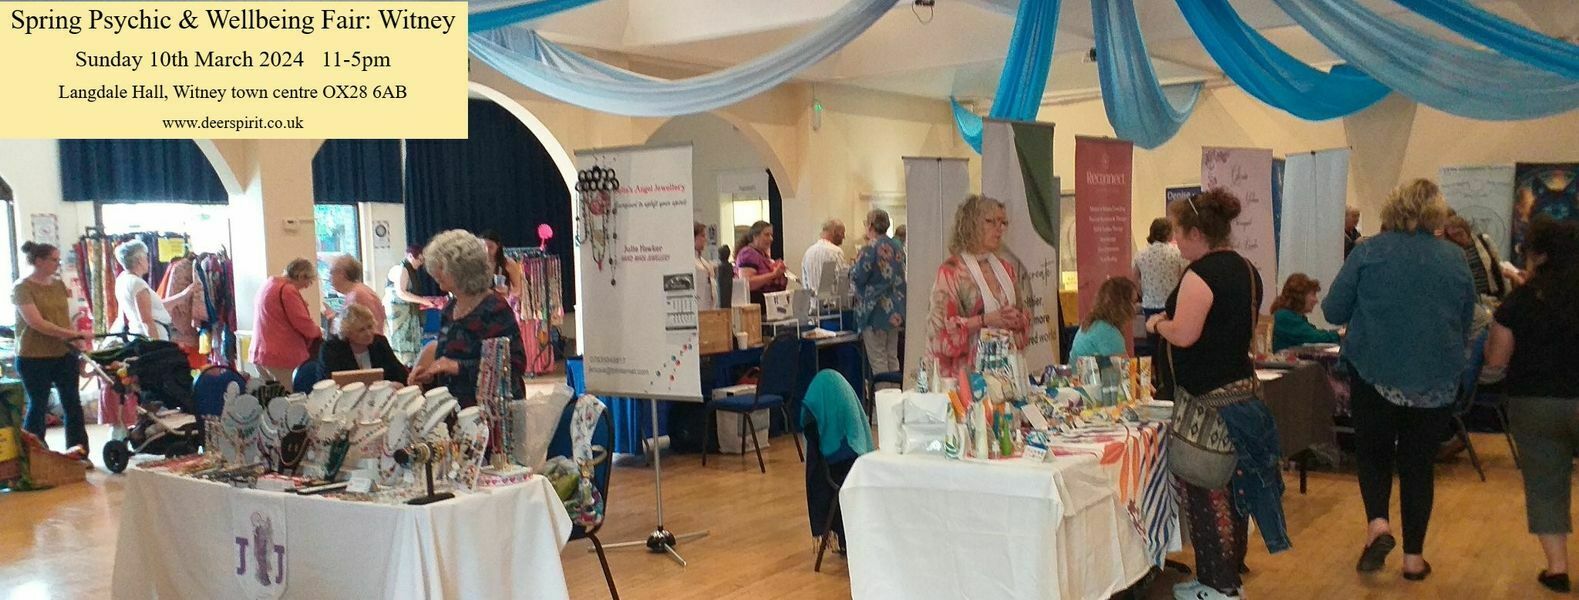 Witney's Spring Psychic and Wellbeing Fair - March 2024, Witney, United Kingdom